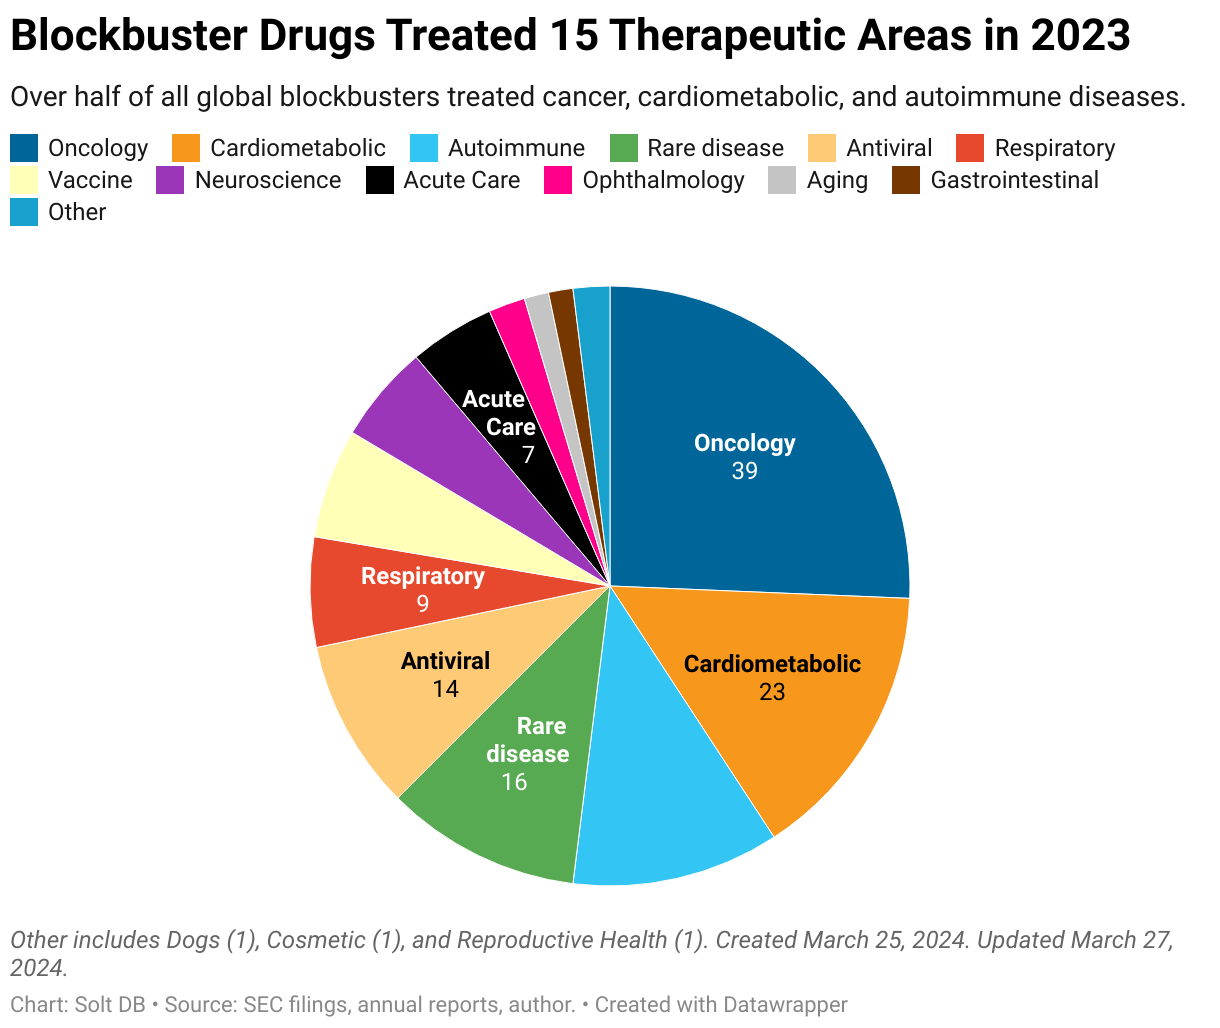 A pie chart showing the distribution of therapeutic areas treated by blockbuster drug products in 2023.